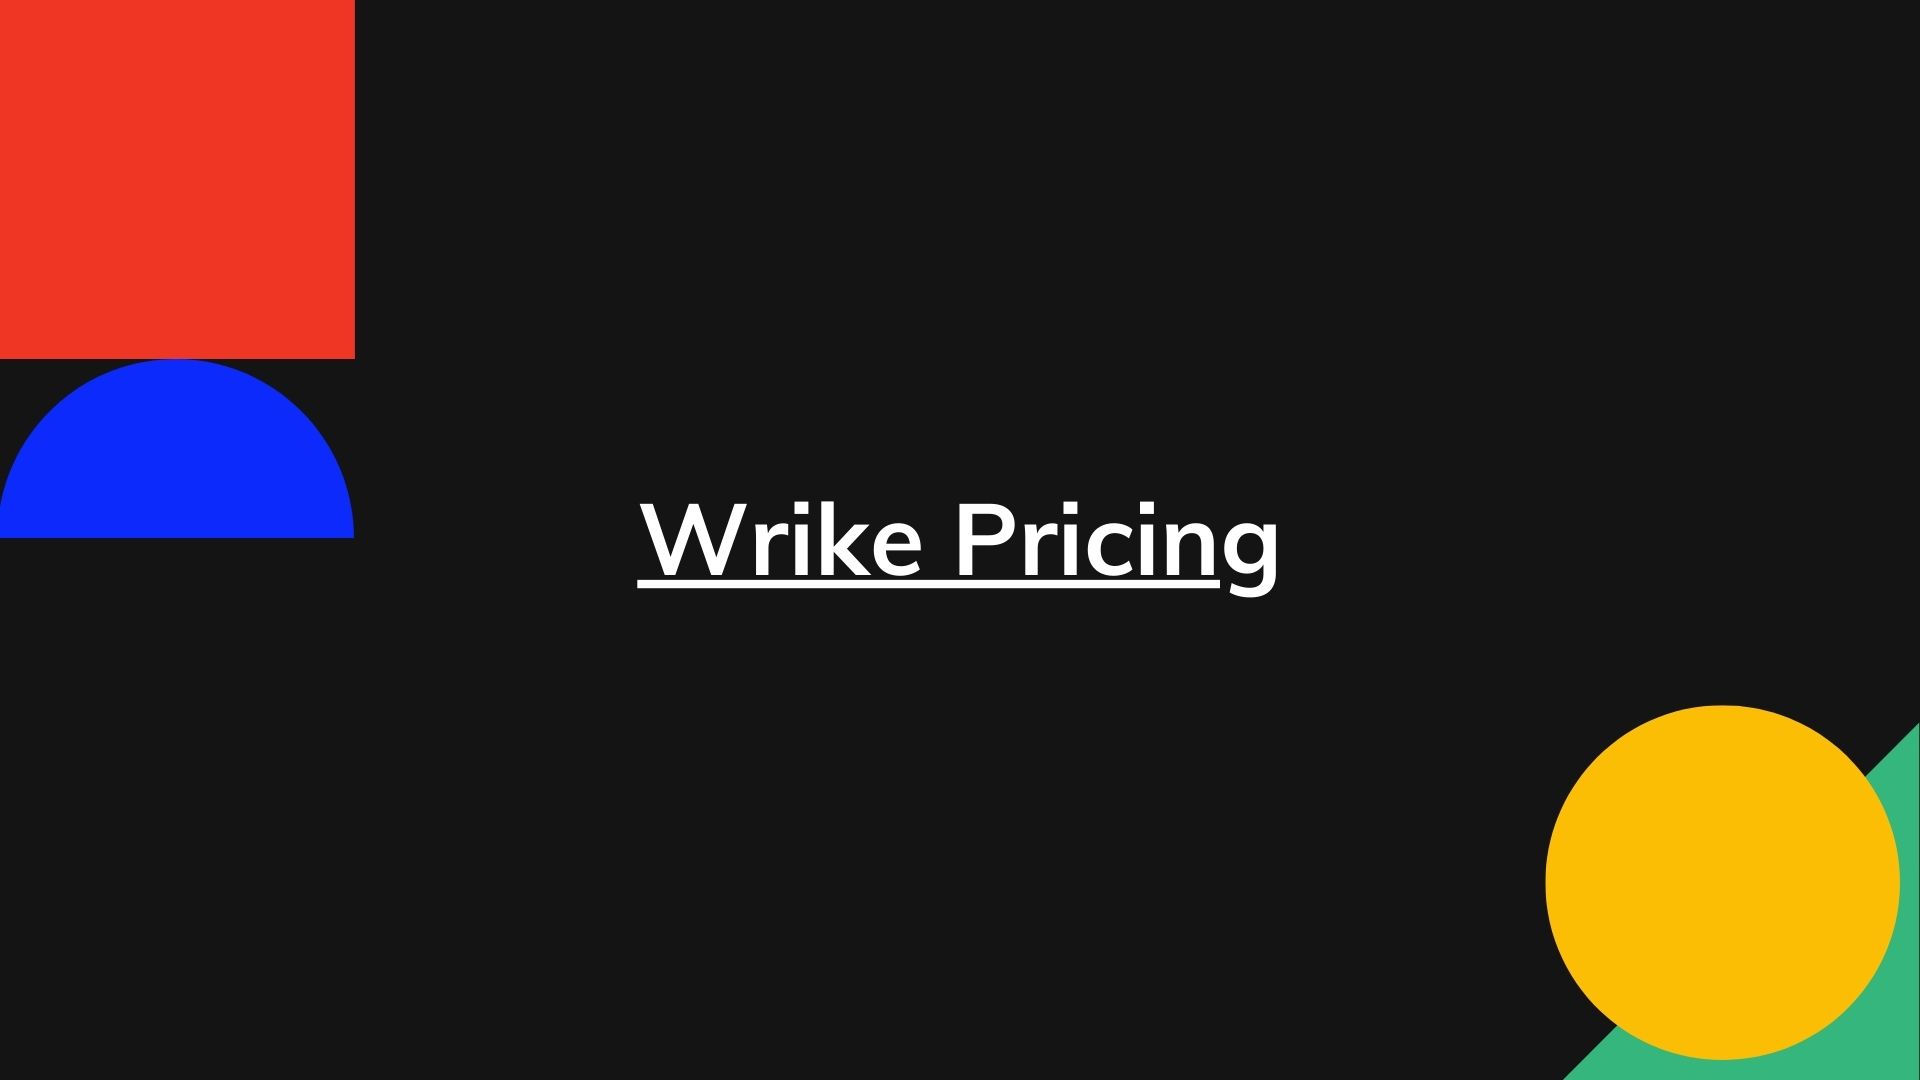 Wrike Pricing – Actual Prices For All Plans